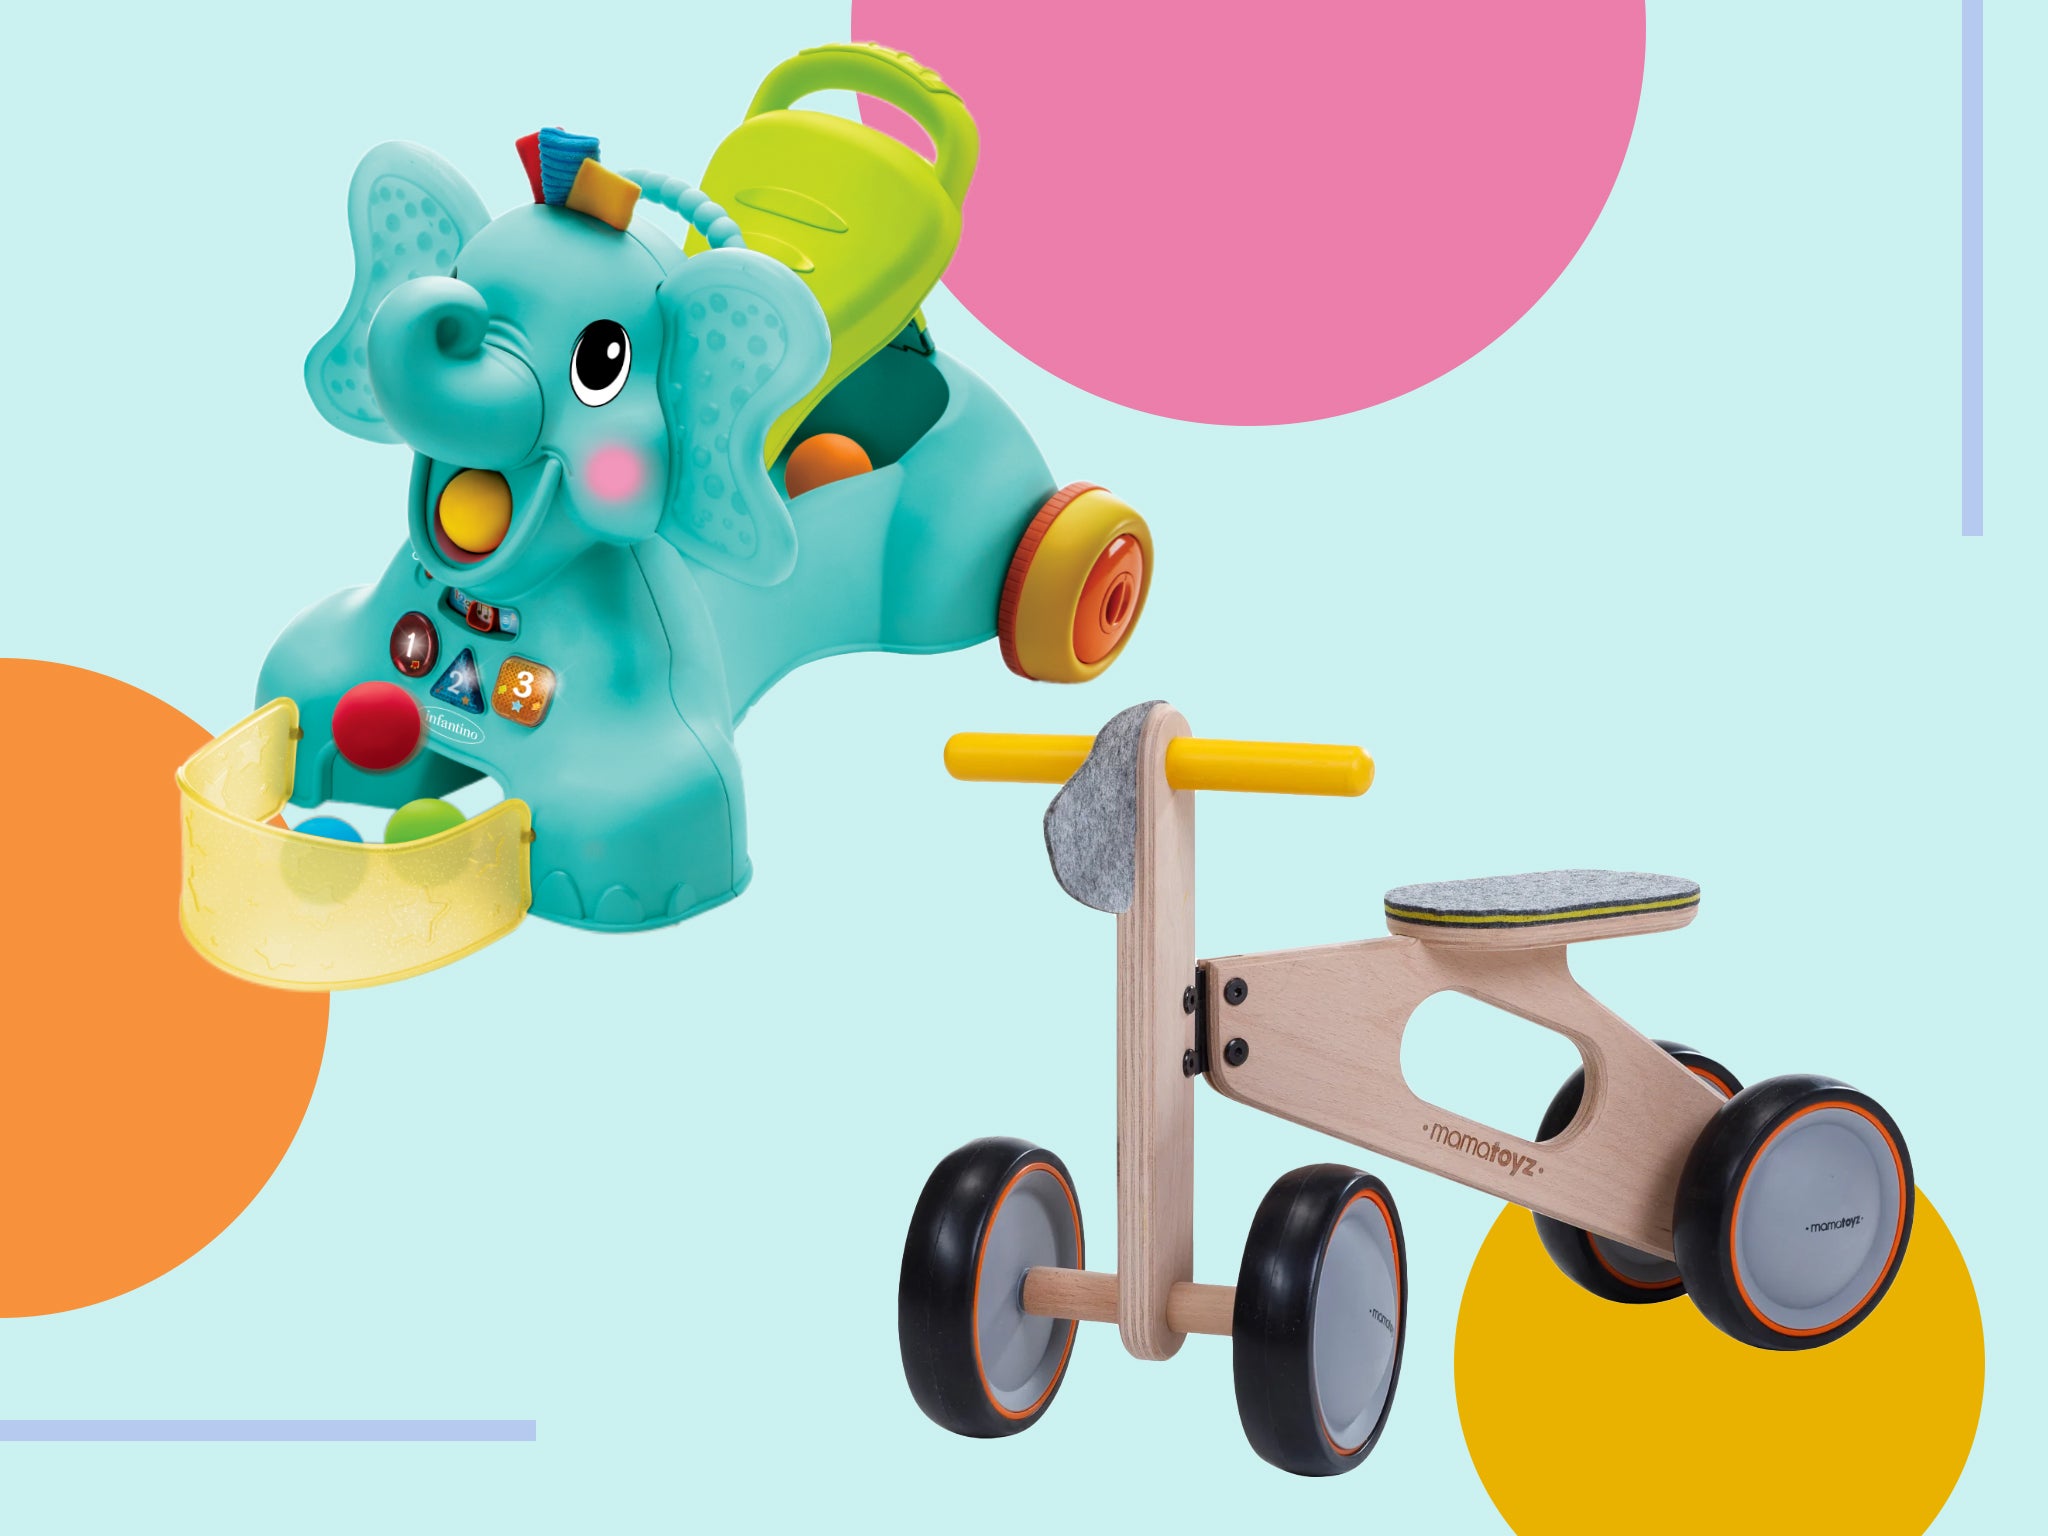 Some of the child-friendly designs even feature 360-degree rotating wheels